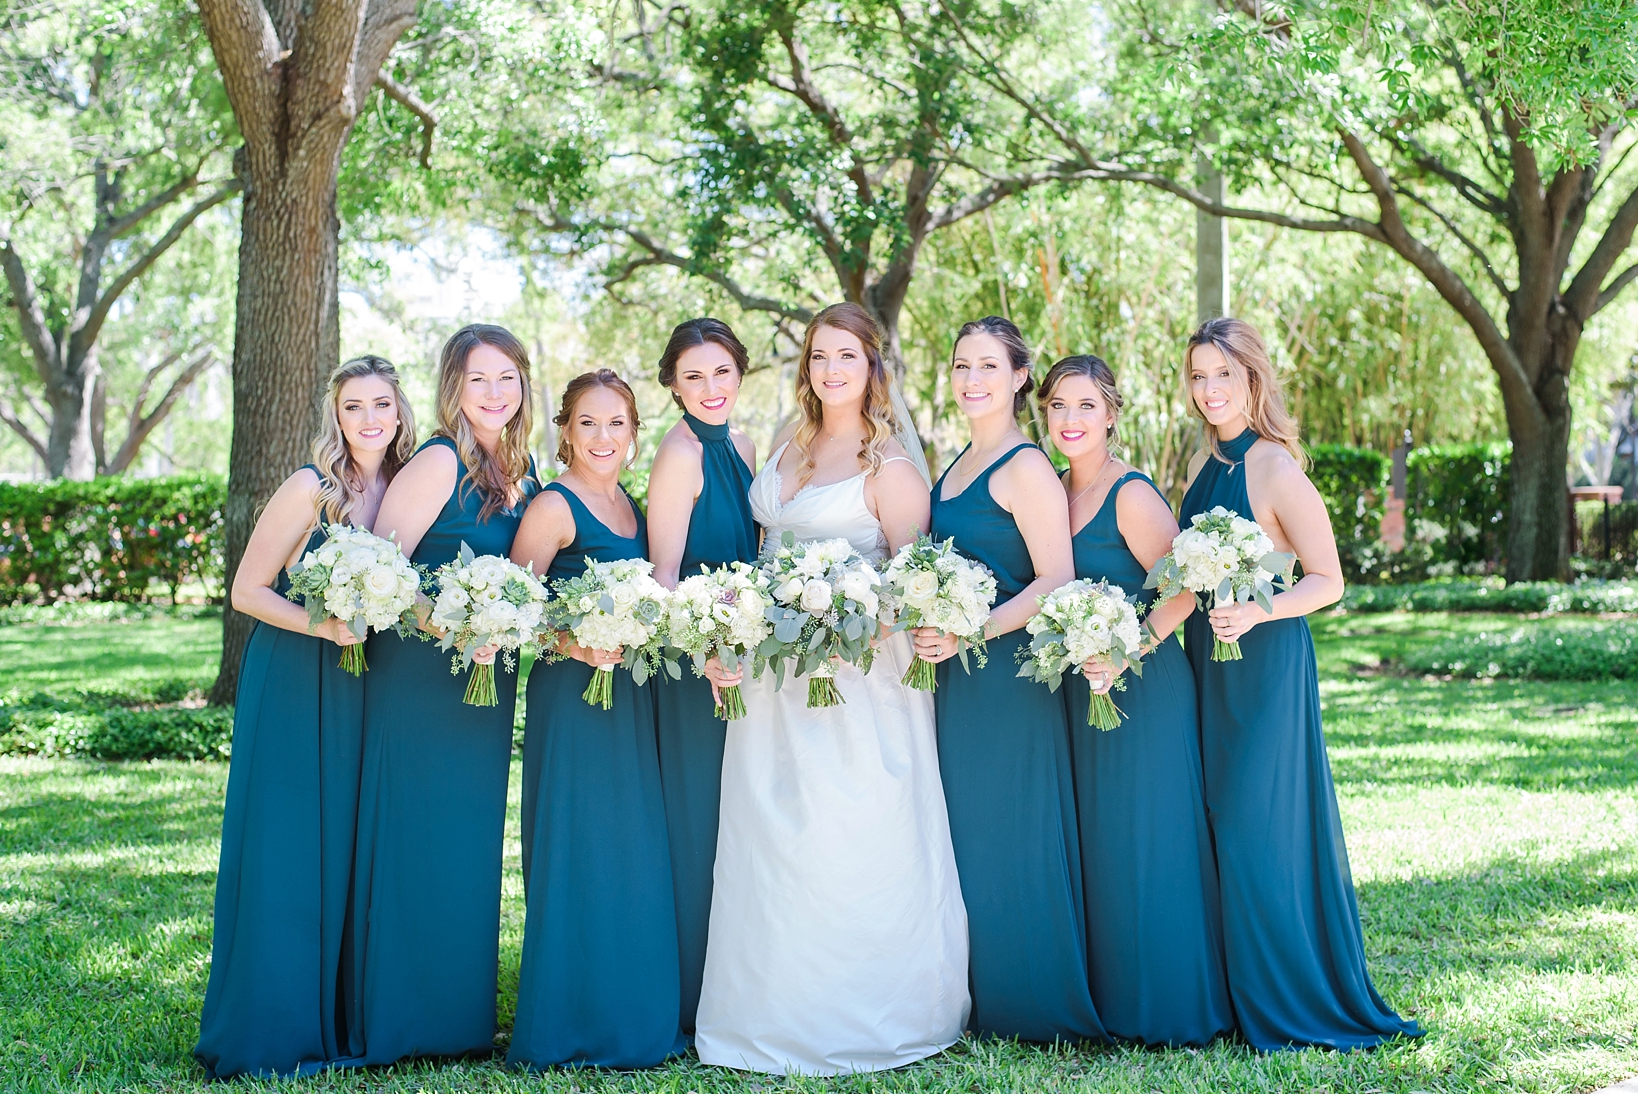 Bride and her bridesmaids in the park at the University of Tampa gardens by Sarah & Ben Photography